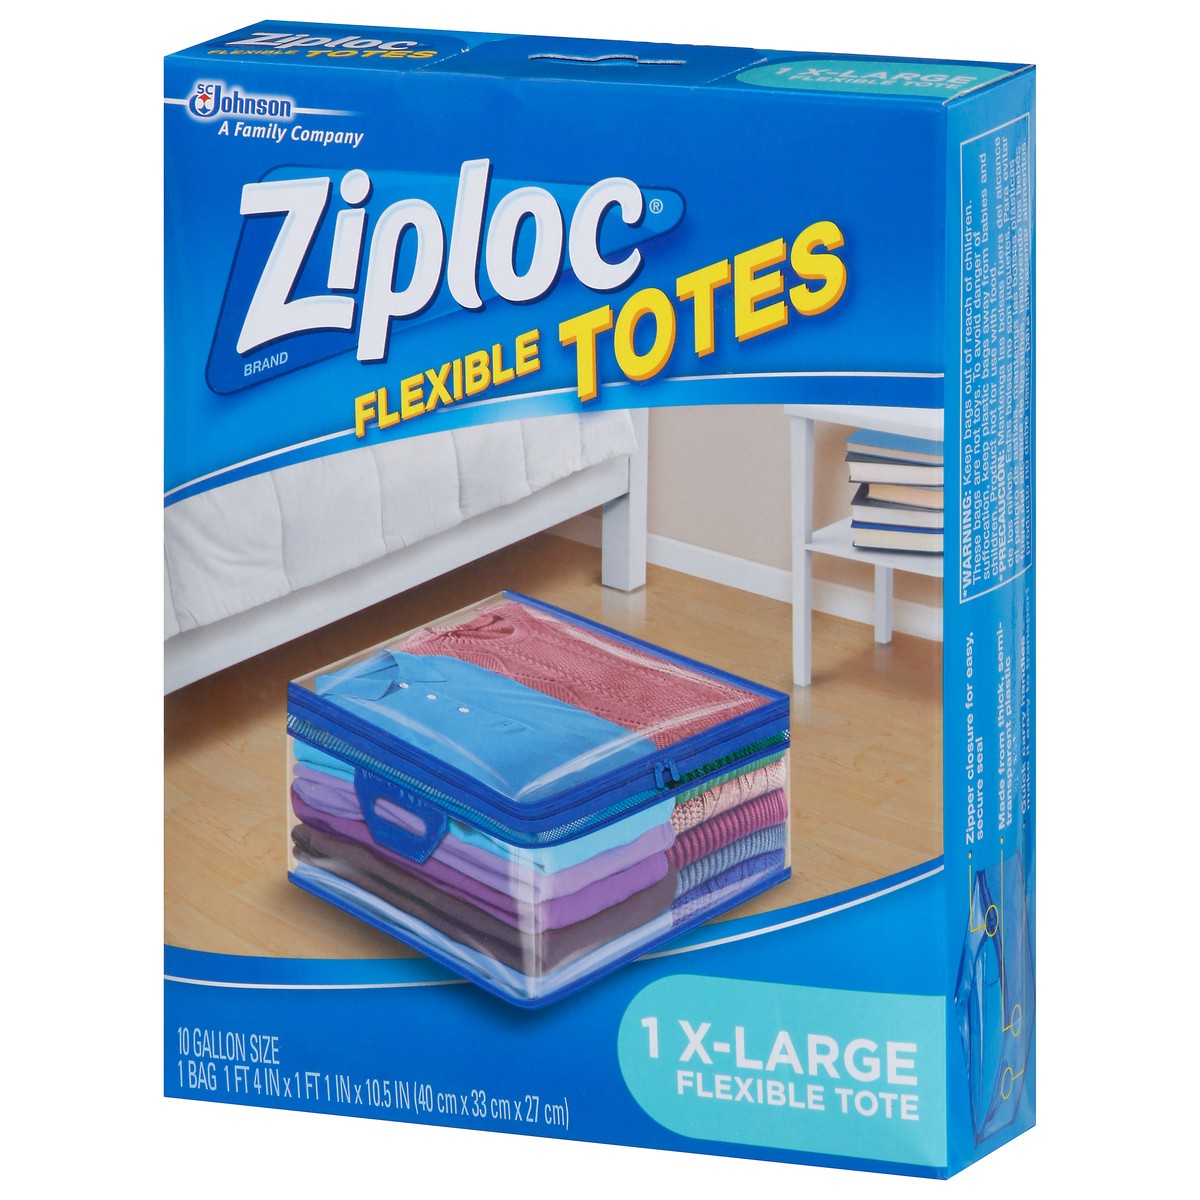 slide 5 of 9, Ziploc Flexible Totes, X-Large, 1 CT, Easy-Close Zipper, Soft-Sided, Rectangular Bags, Built-In Handles, Thick Semi-Transparent Plastic, Flexible to Fit Where You Want Them, 1 ct